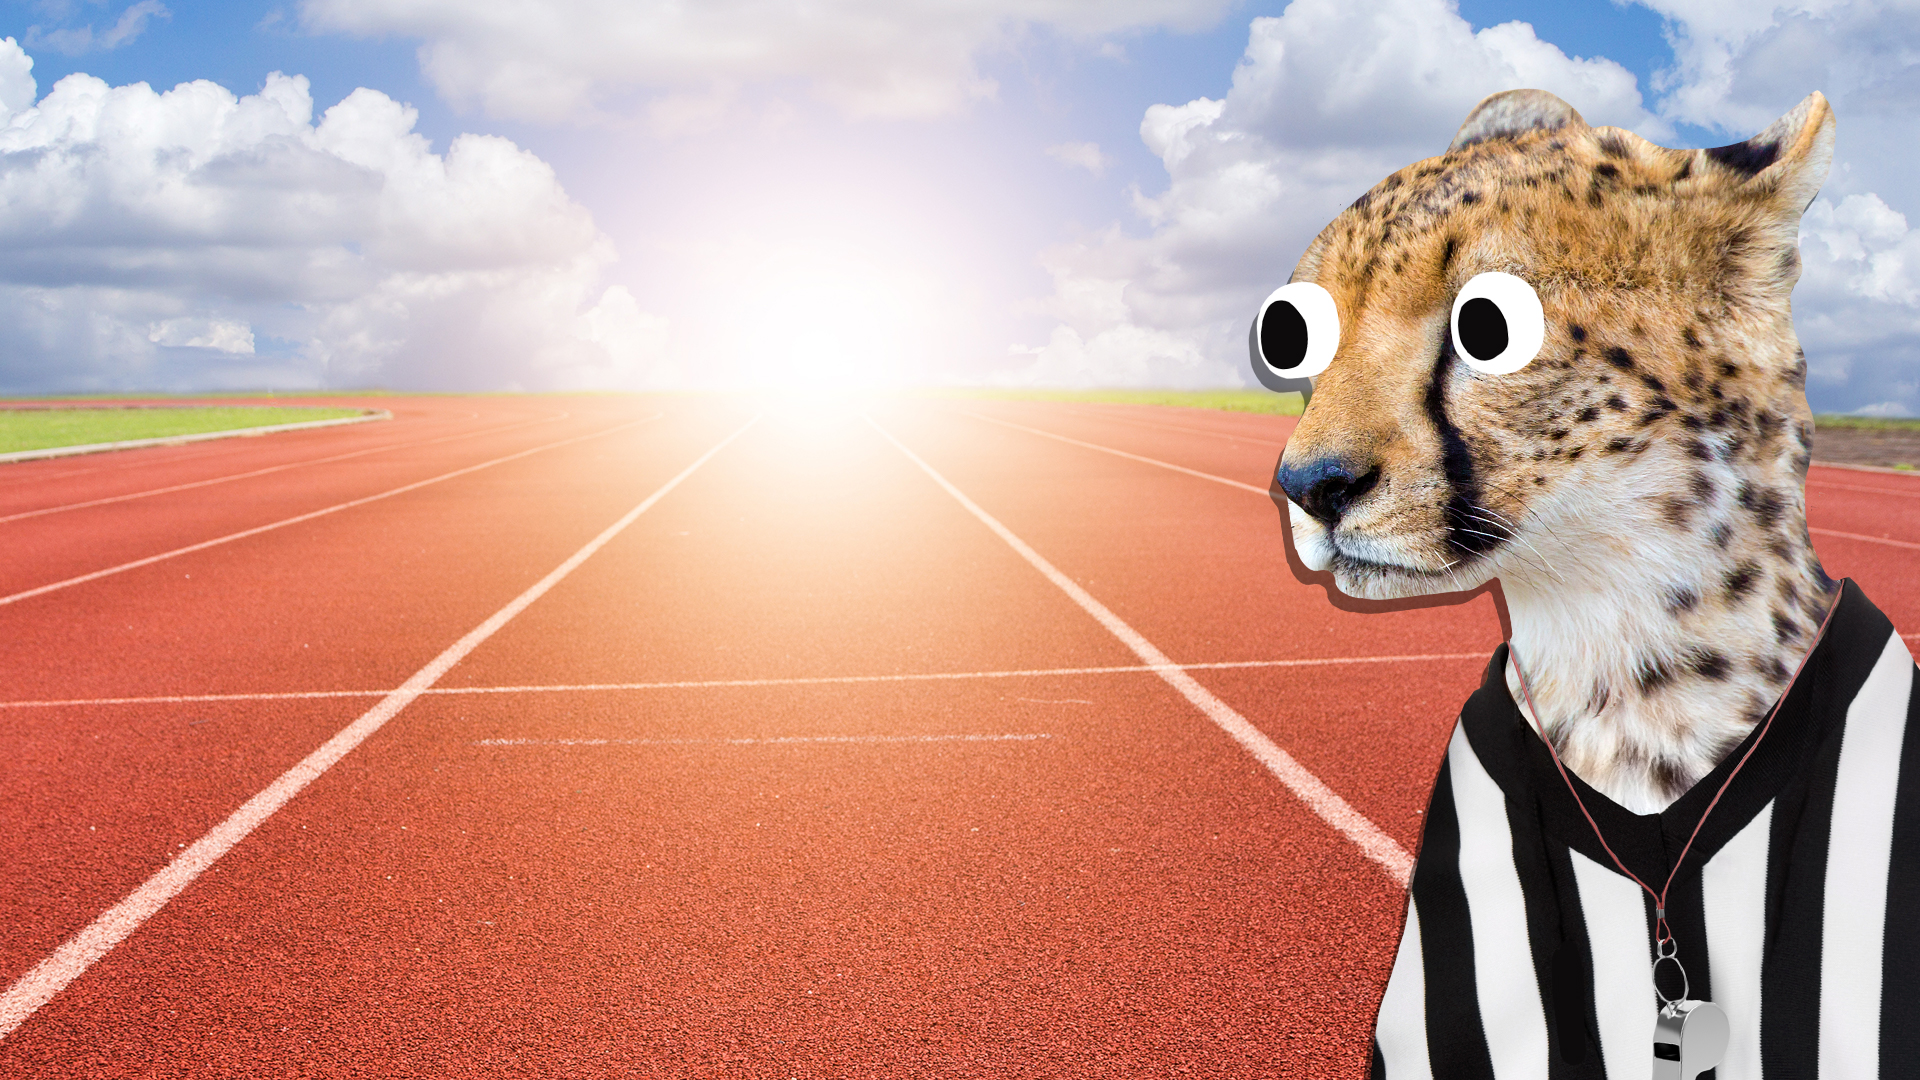 A cheetah on a running track